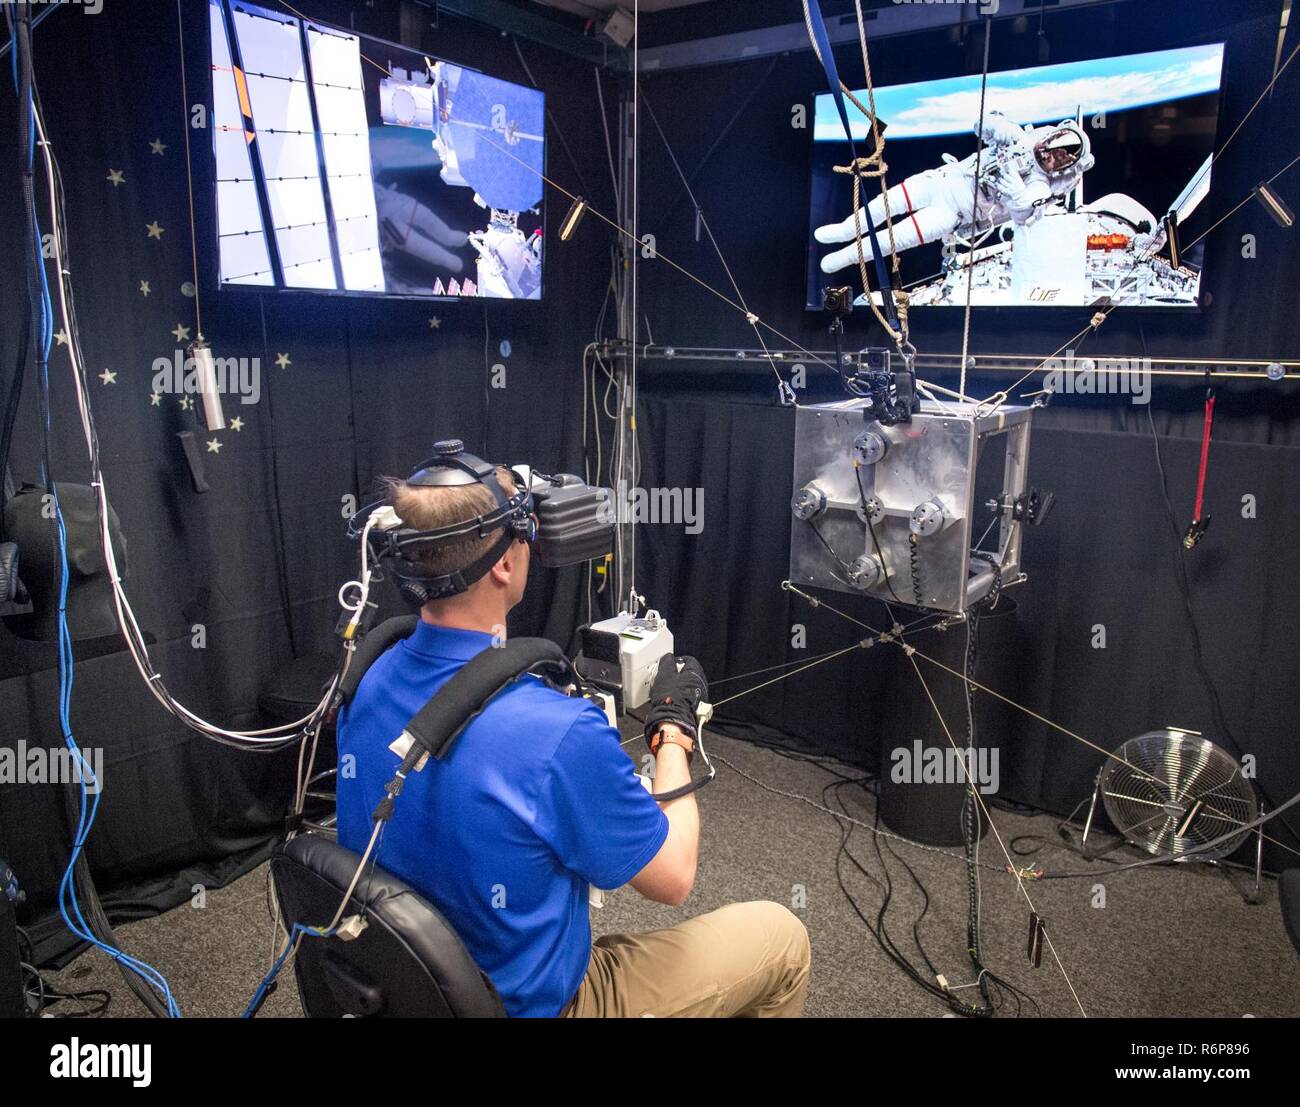 NASA Astronaut Col. Tyler "Nick" Hague's progress is monitored on video  screens during a virtual reality training scenario for use of the  Simplified Aid for EVA Rescue (SAFER) pack to return to